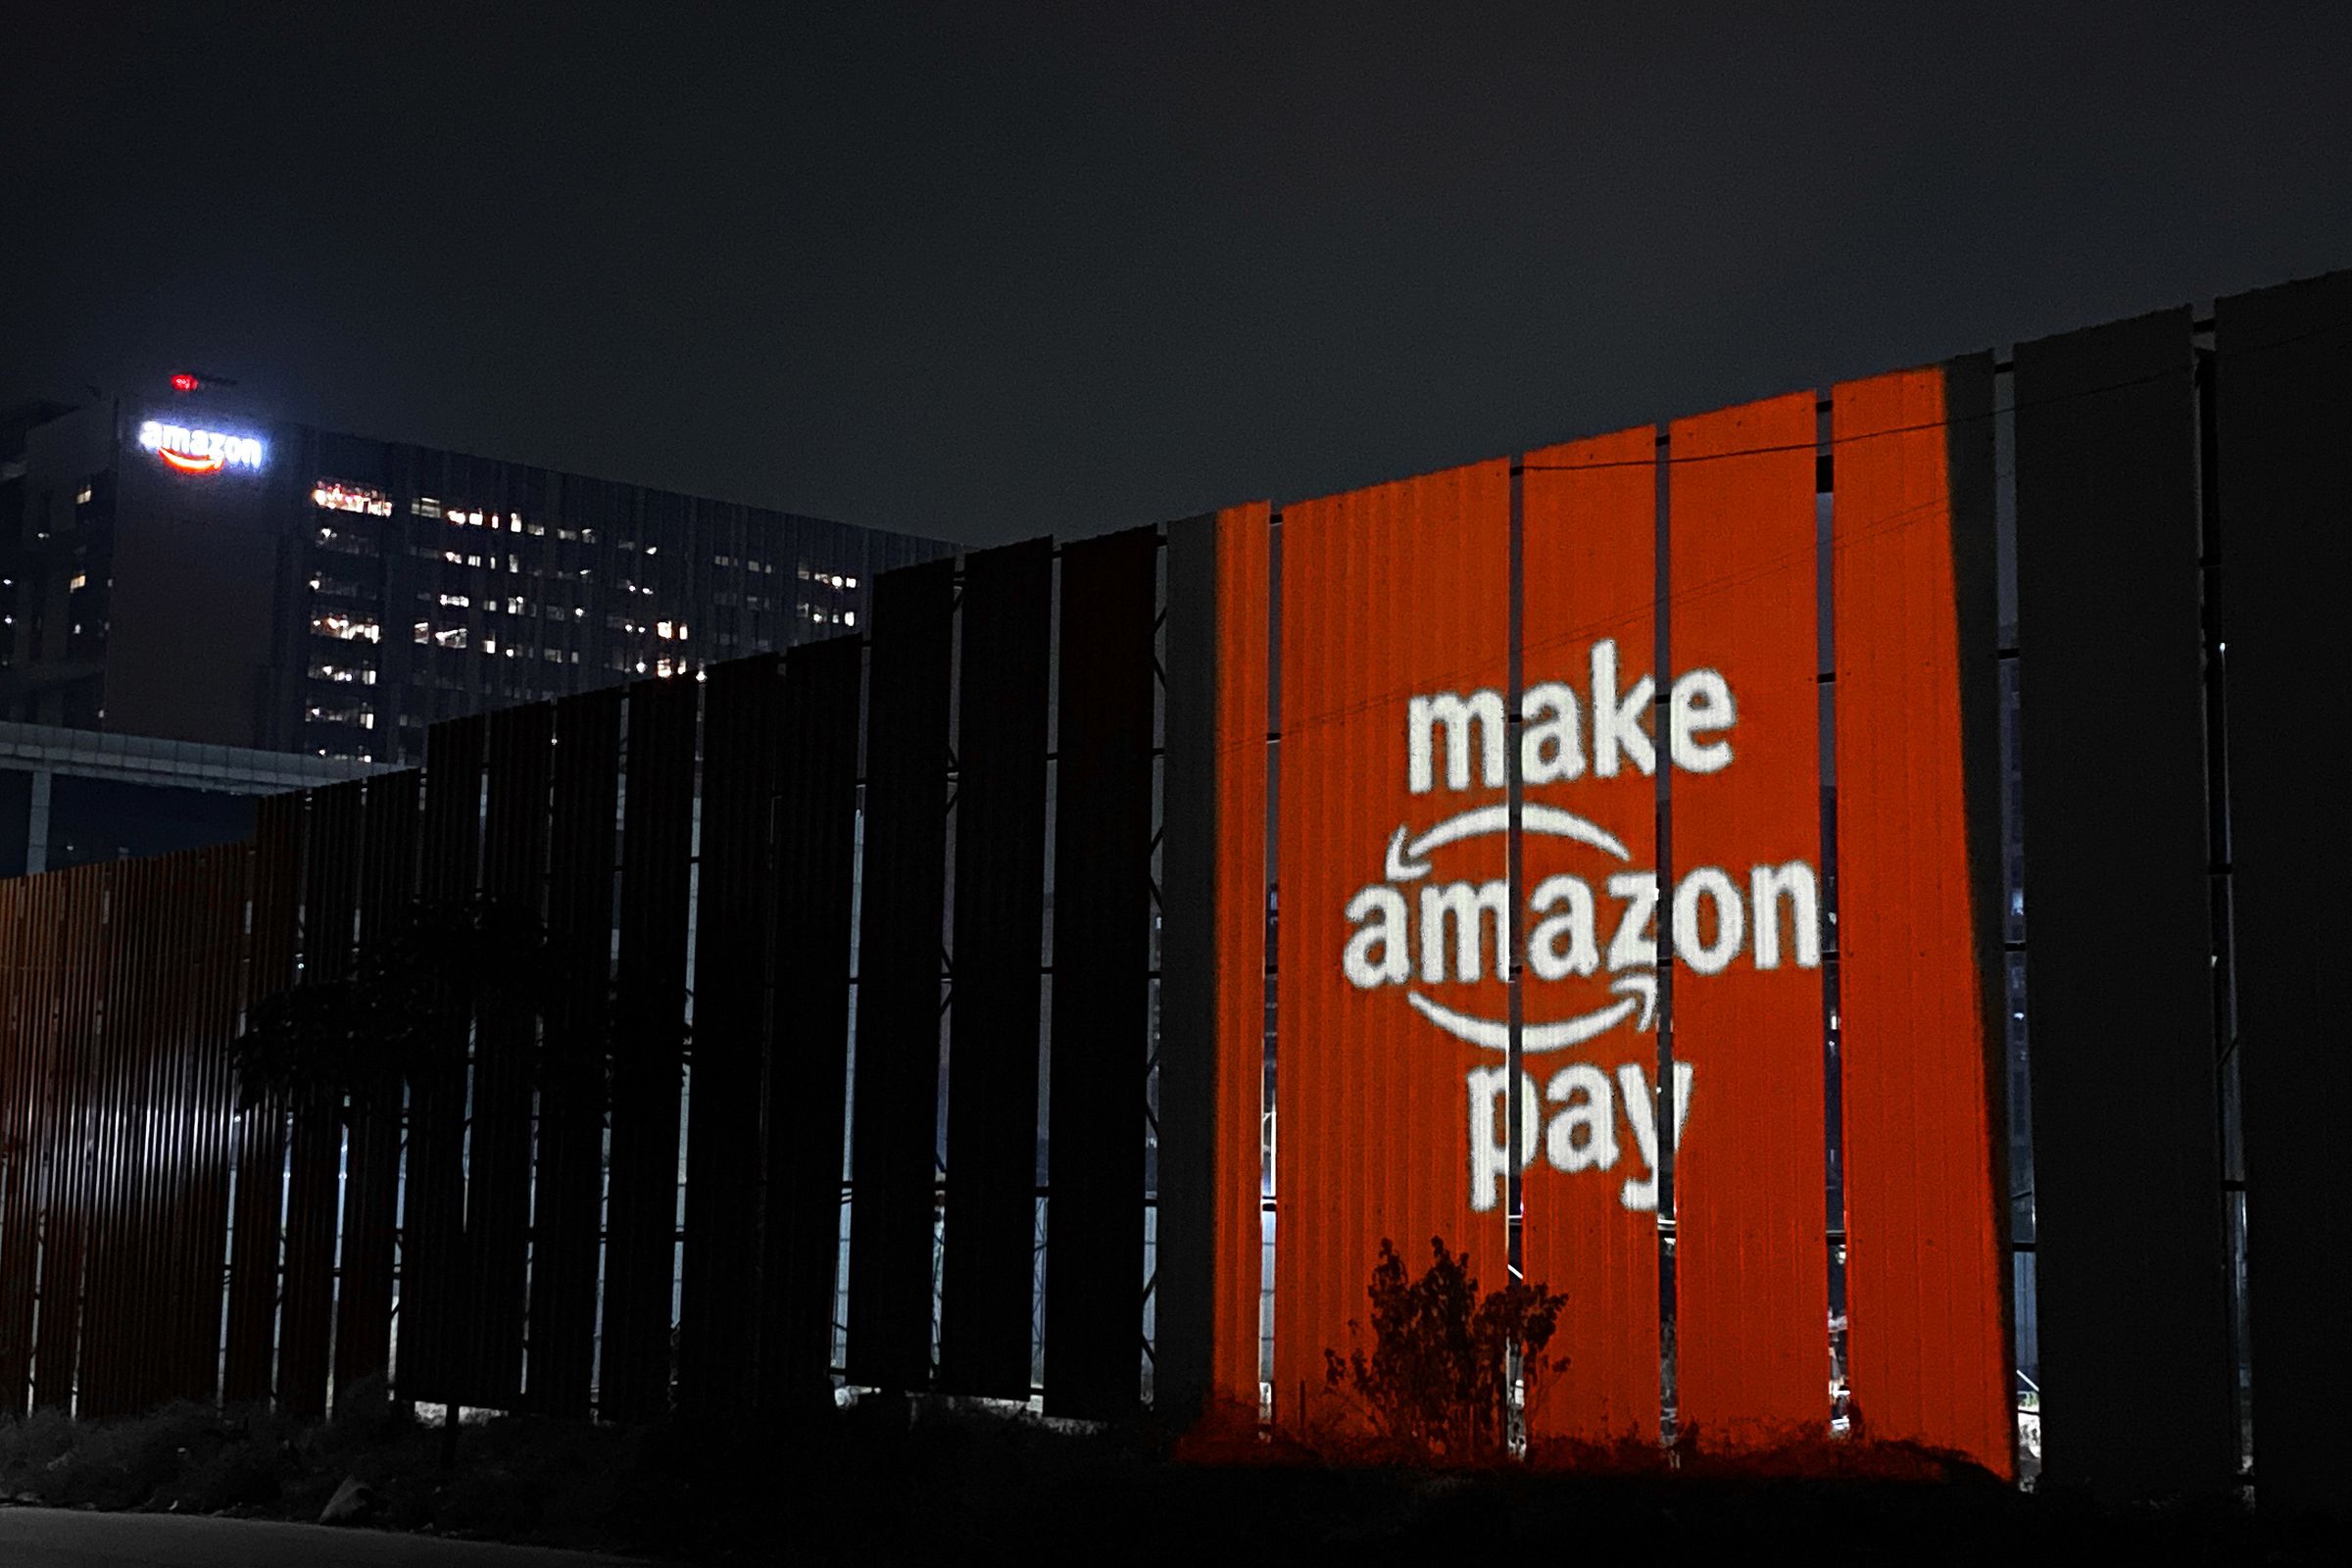 The “Make Amazon Pay” logo projected onto Amazon’s campus in Hyderabad, India.